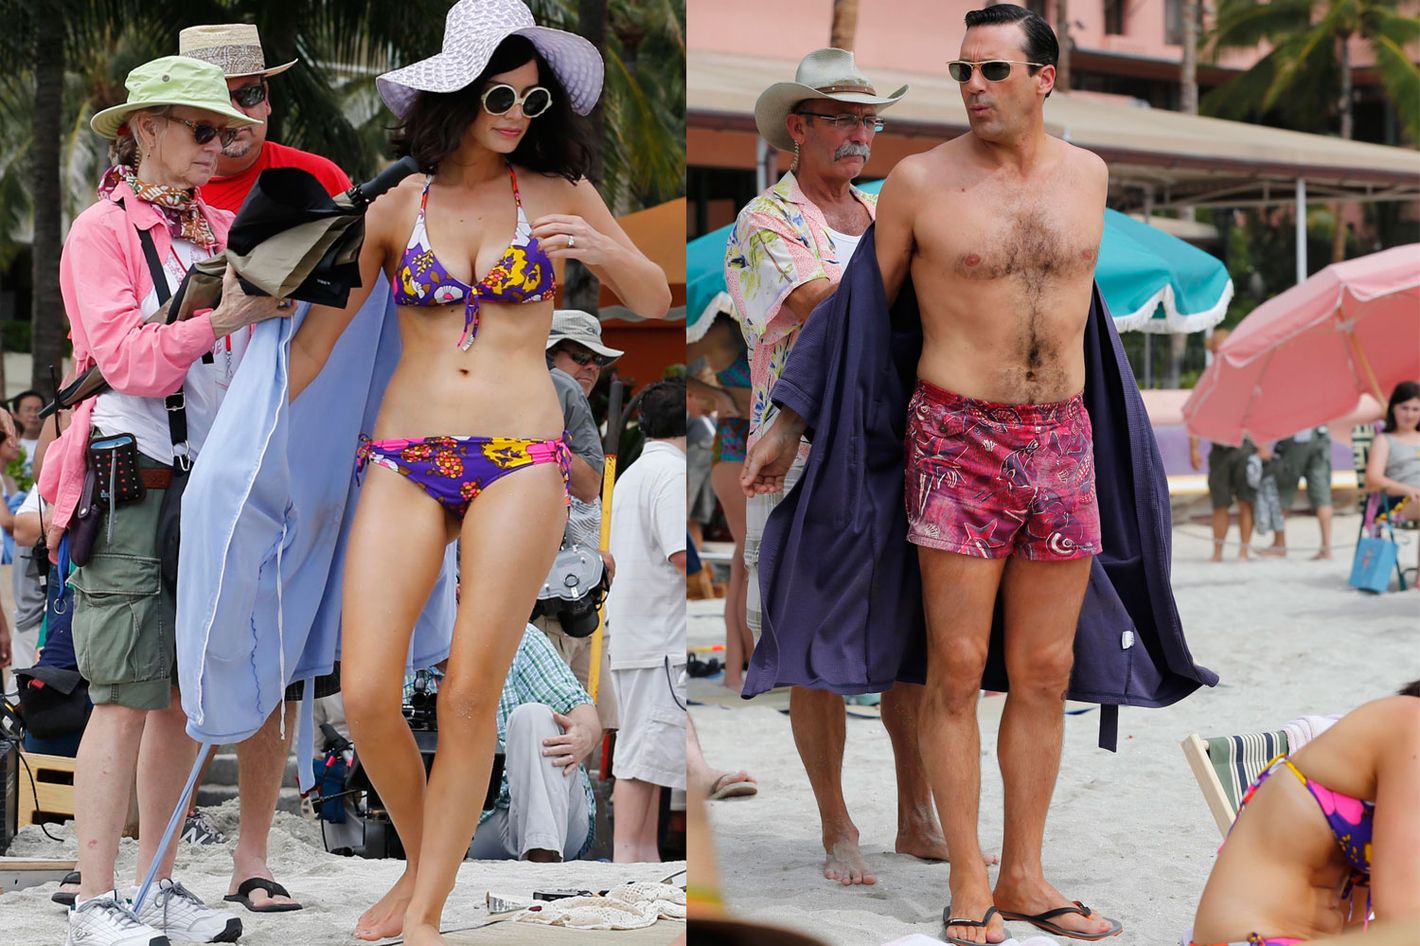 See New Mad Men Photos Of Jon Hamm And Jessica Paré On The Beach